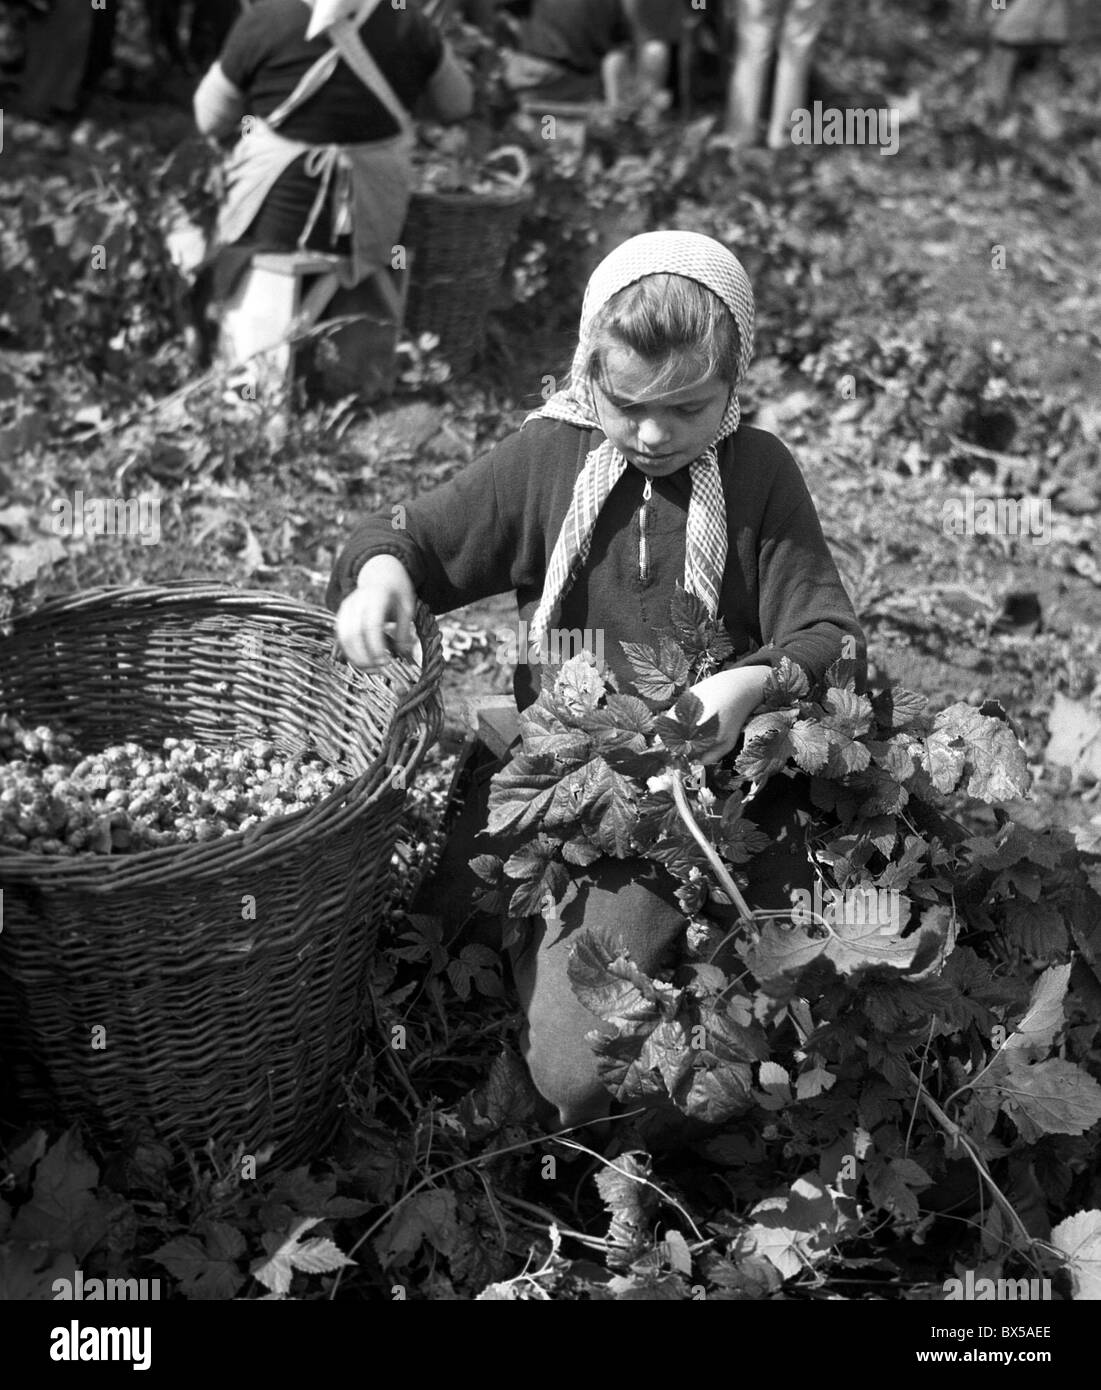 Czechoslovakia - 1948. Student picks hops, an important ingredience in beer brewing. CTK Vintage Photo Stock Photo